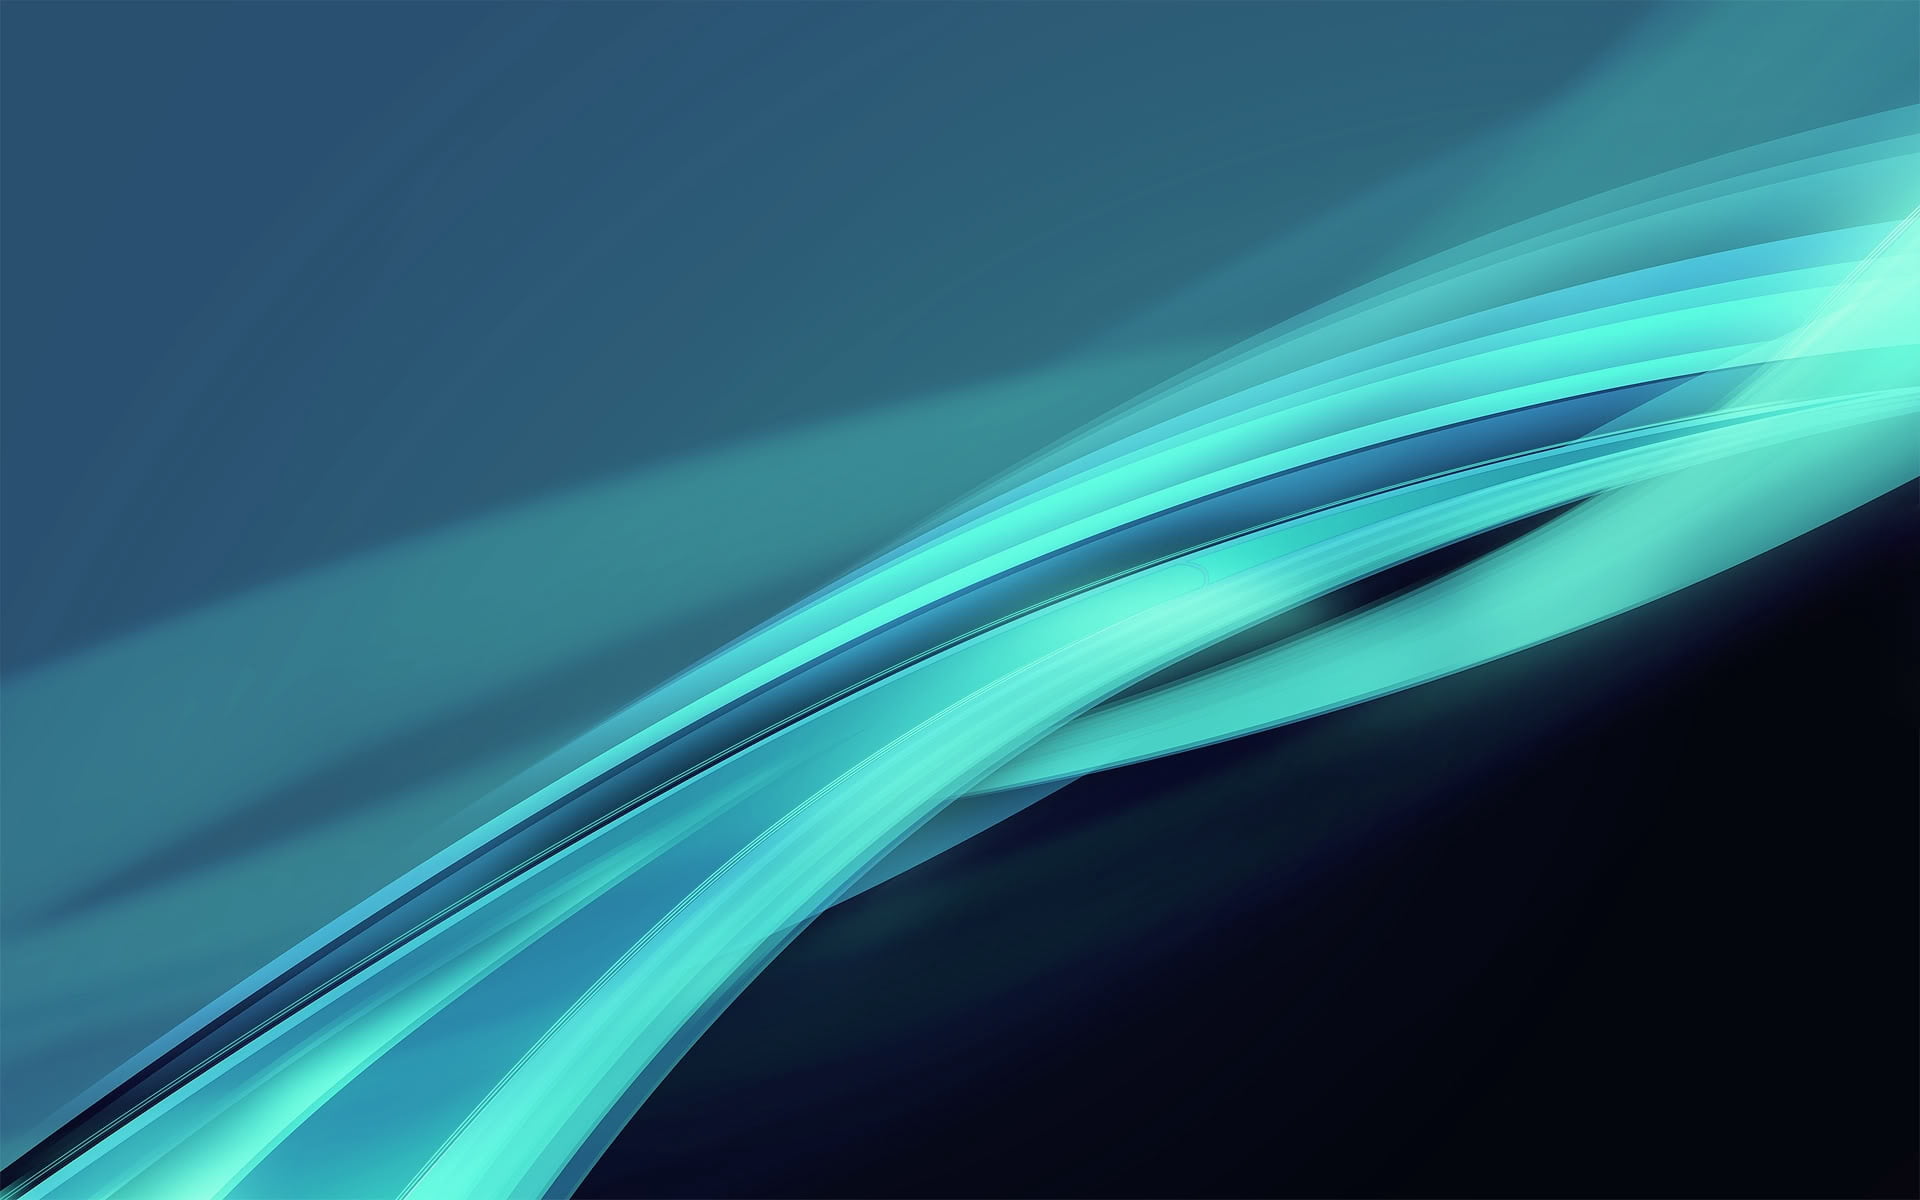 teal and blue waves, lines, light, bright, lights, abstract, backgrounds